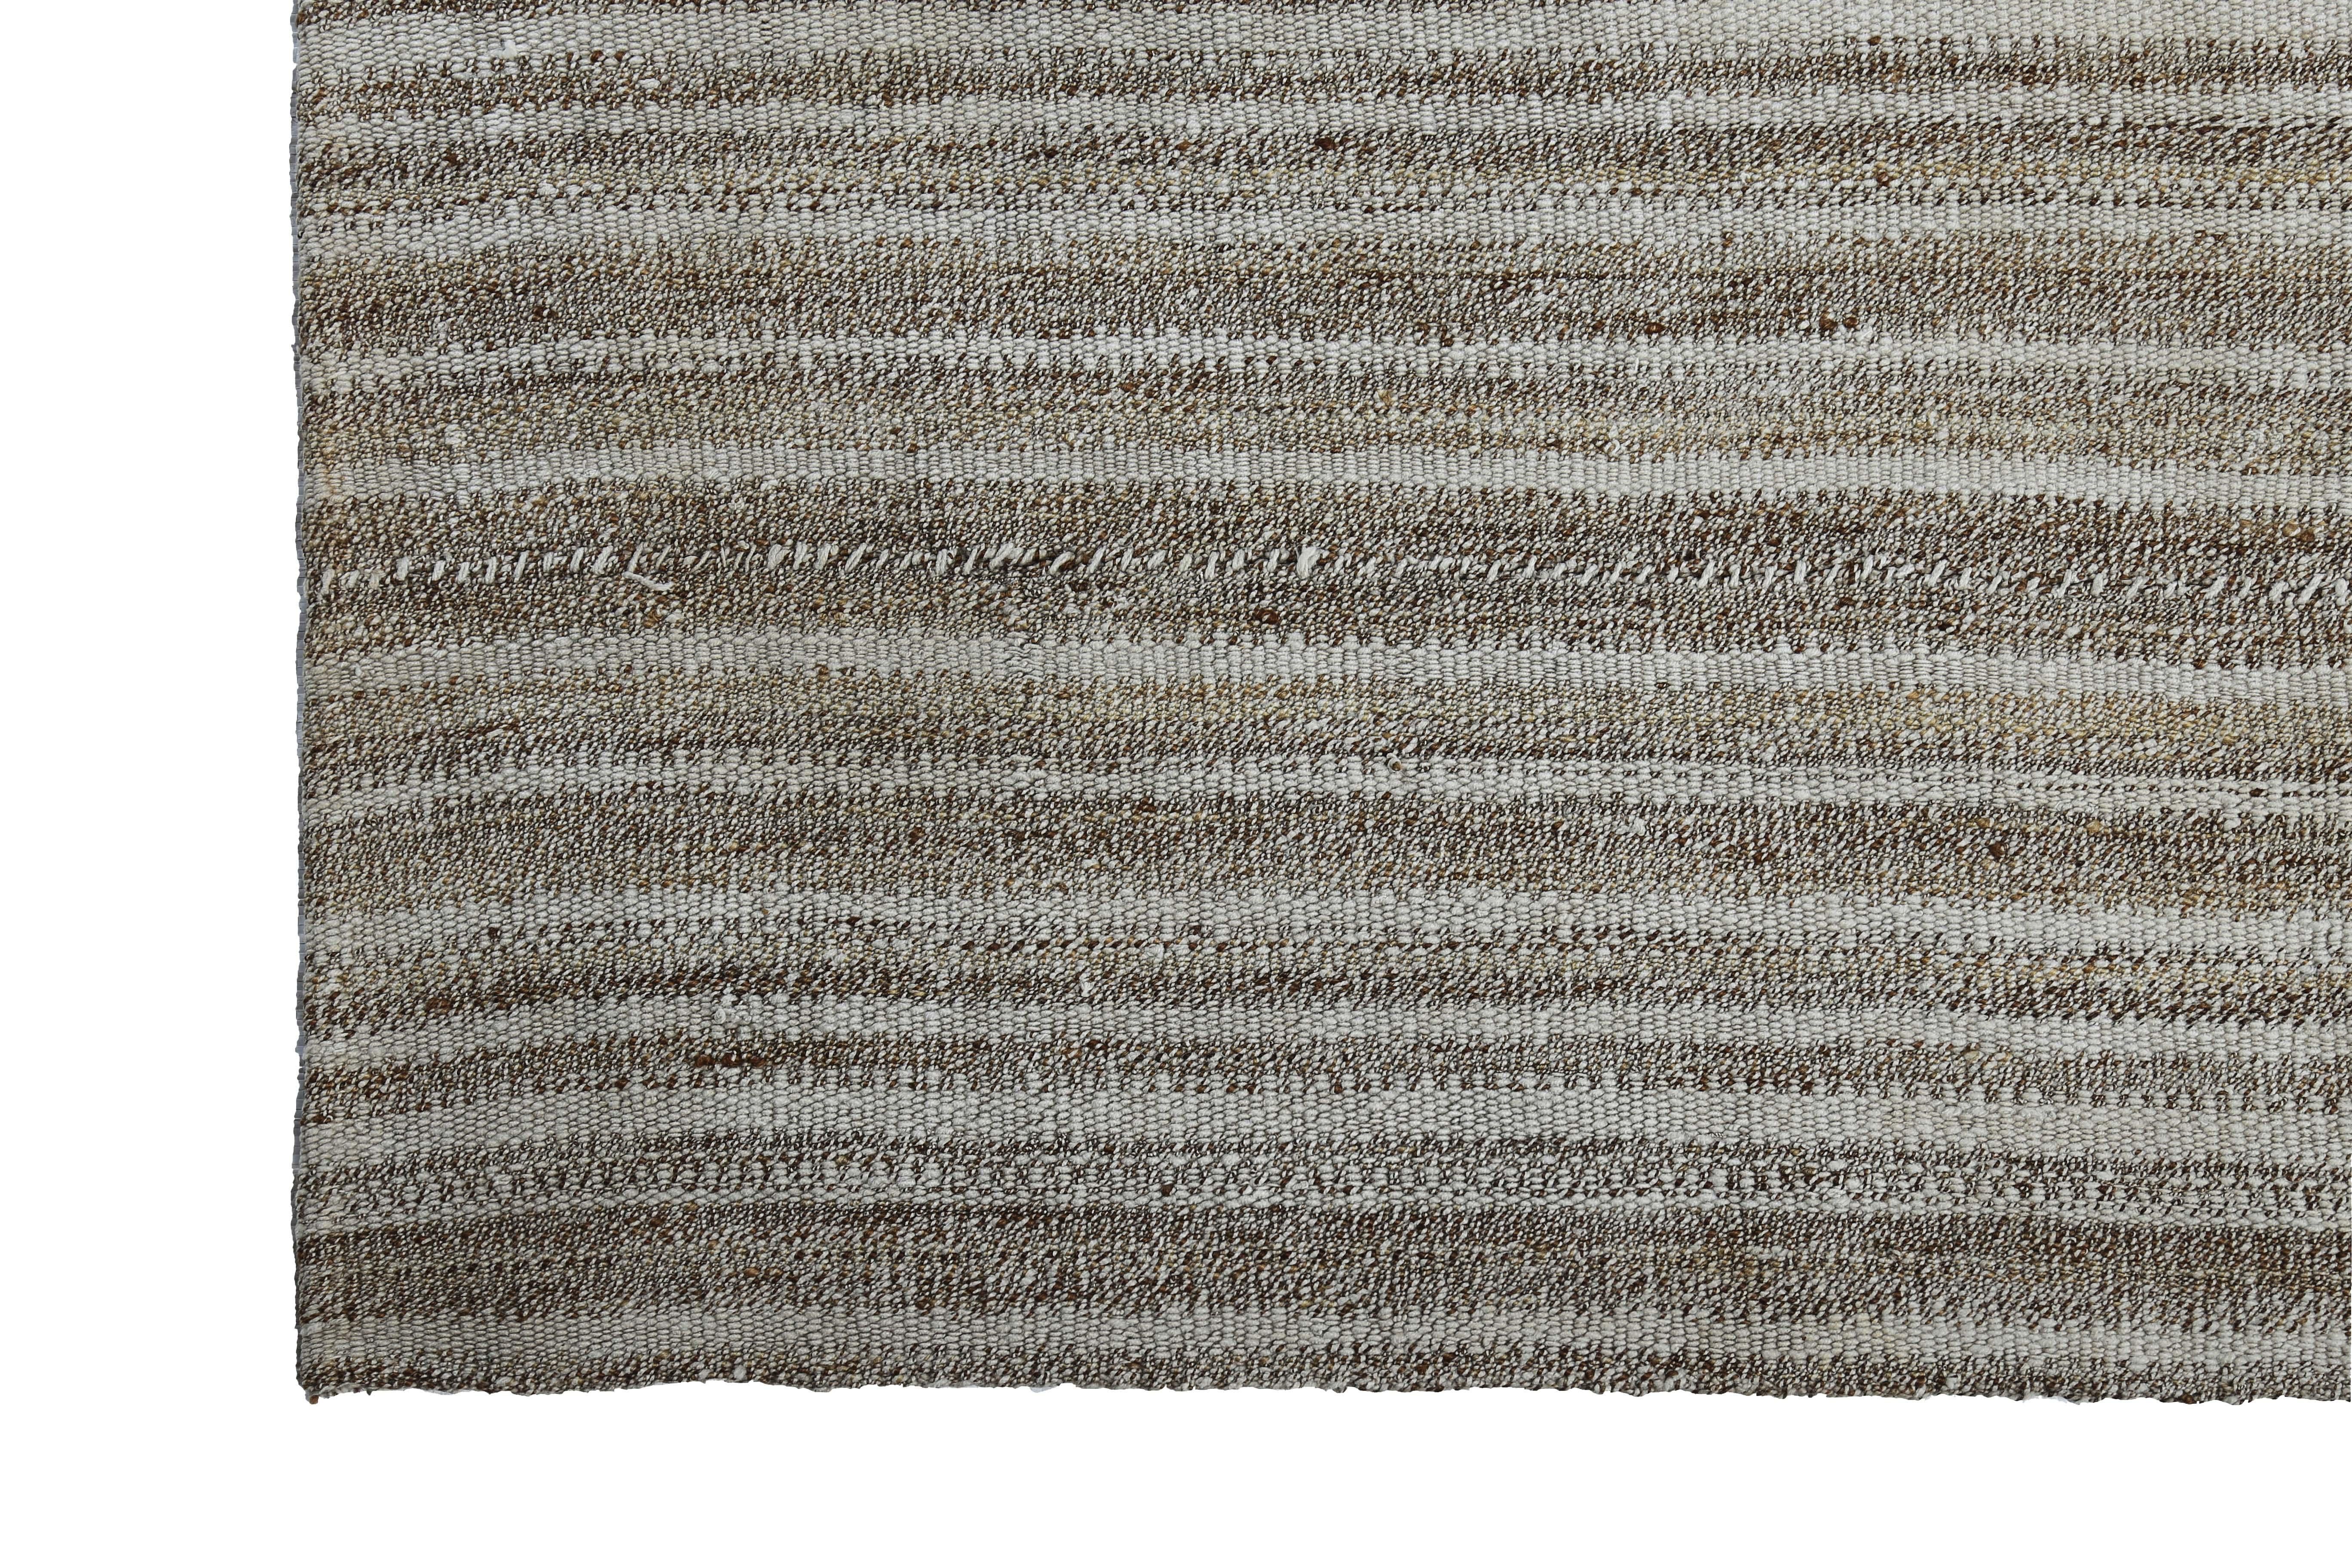 Hand-Woven Modern Turkish Kilim Rug with Brown Pencil Stripes on Gray Field For Sale